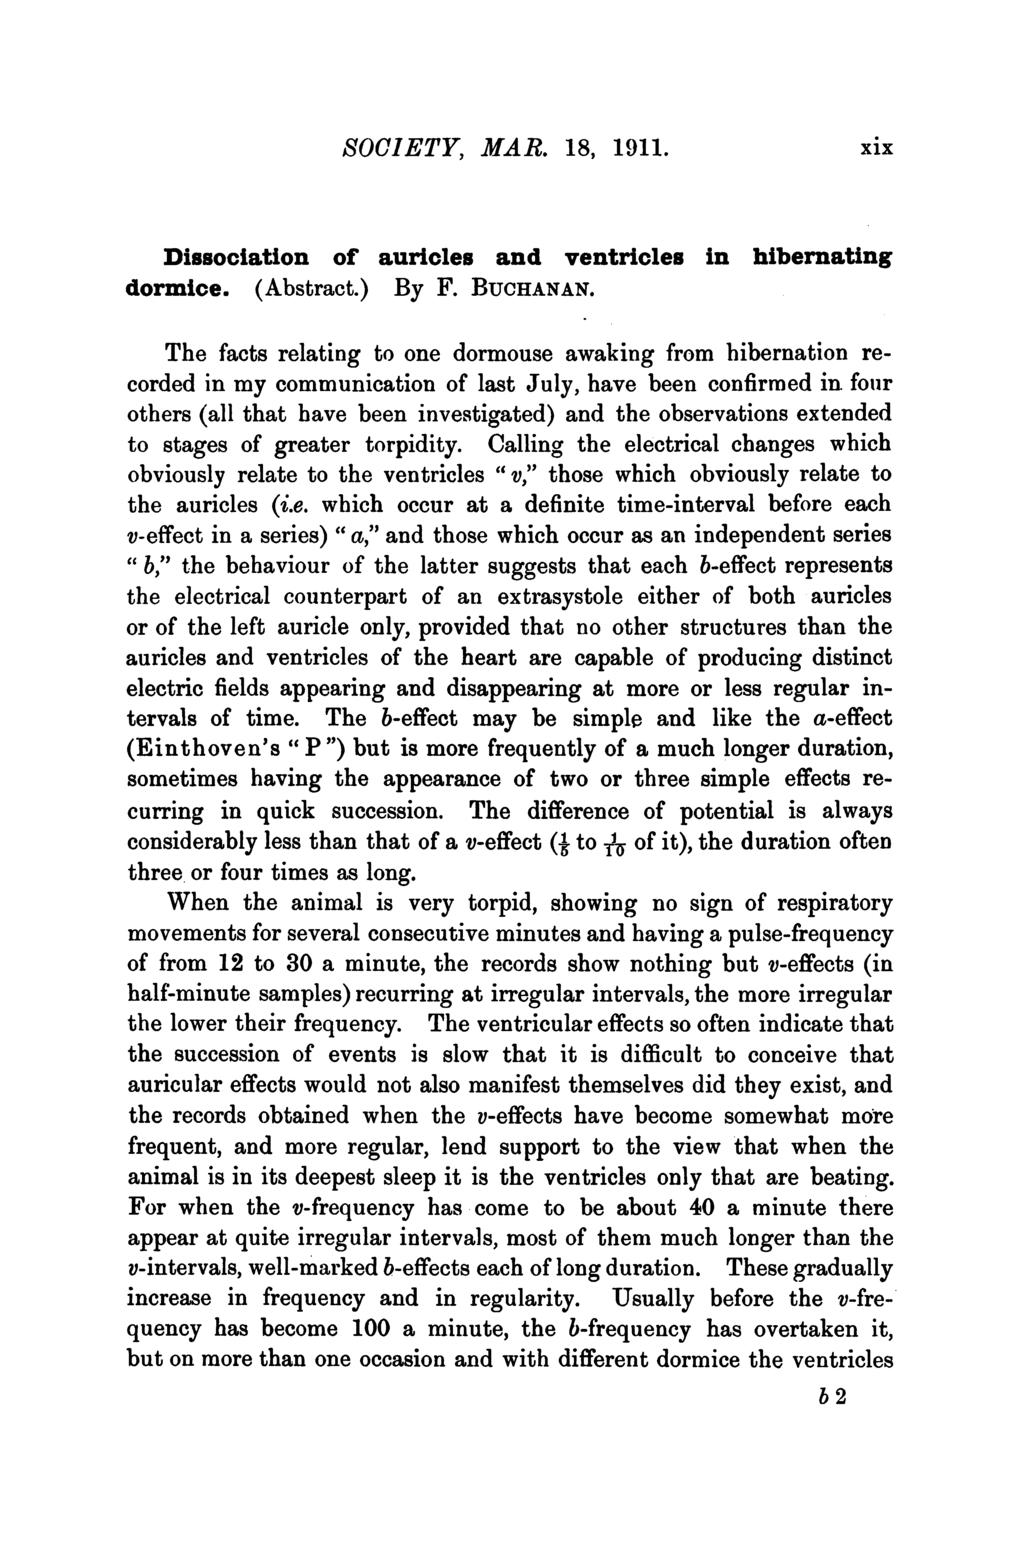 SOCIETY, MAR. 18, 1911. XiX Dissociation of auricles and ventricles in hibernating dormice. (Abstract.) By F. BUCHANAN.